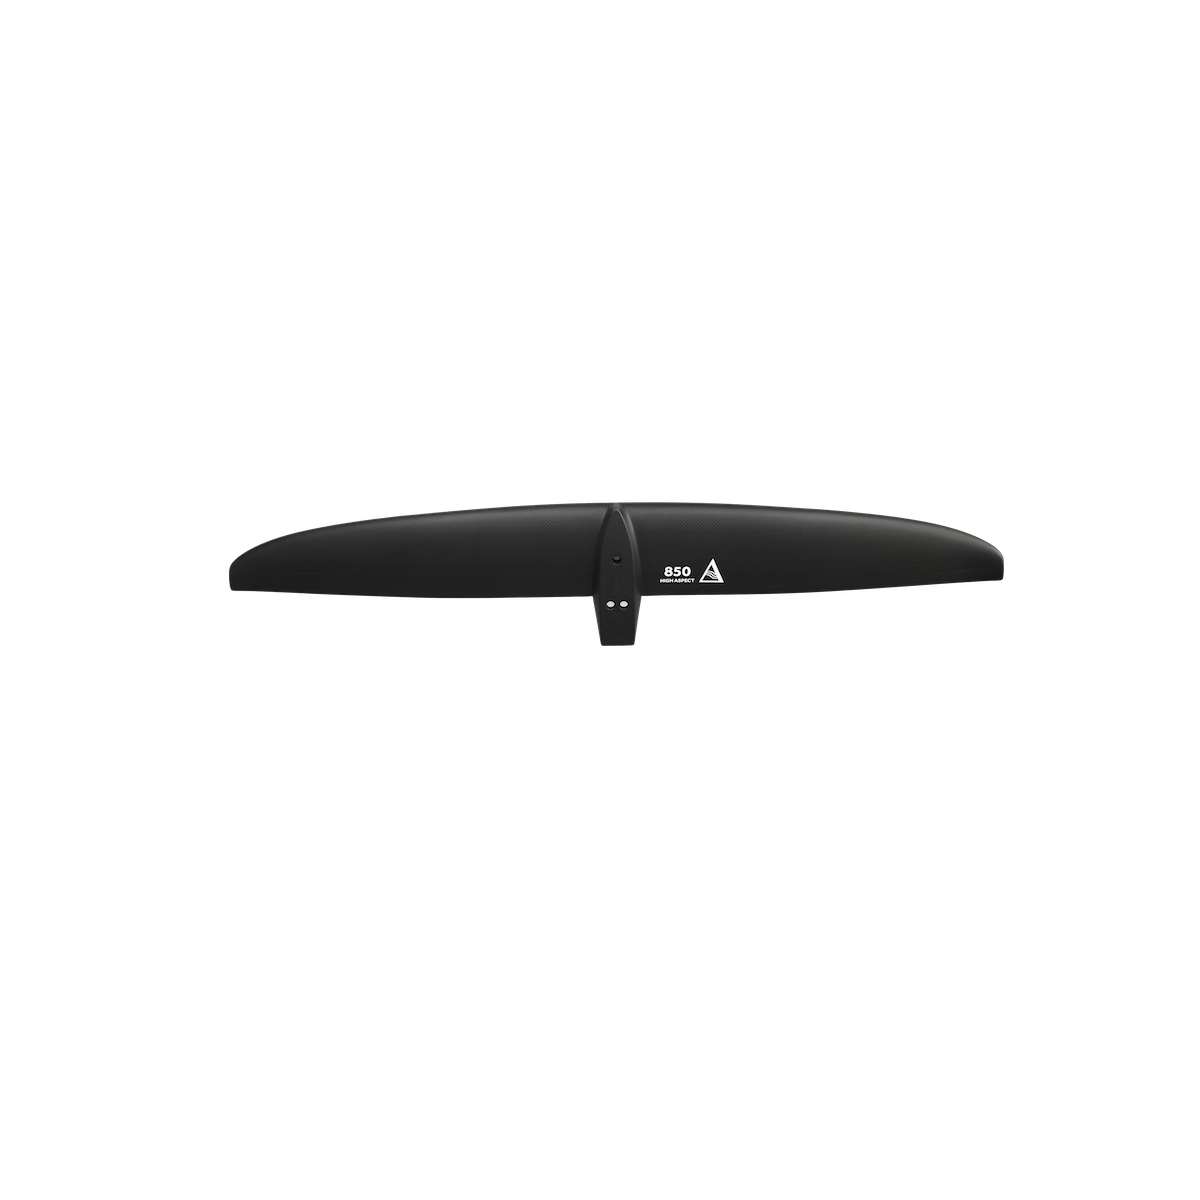 Delta Hydrofoil High Aspect 700 Front Wing